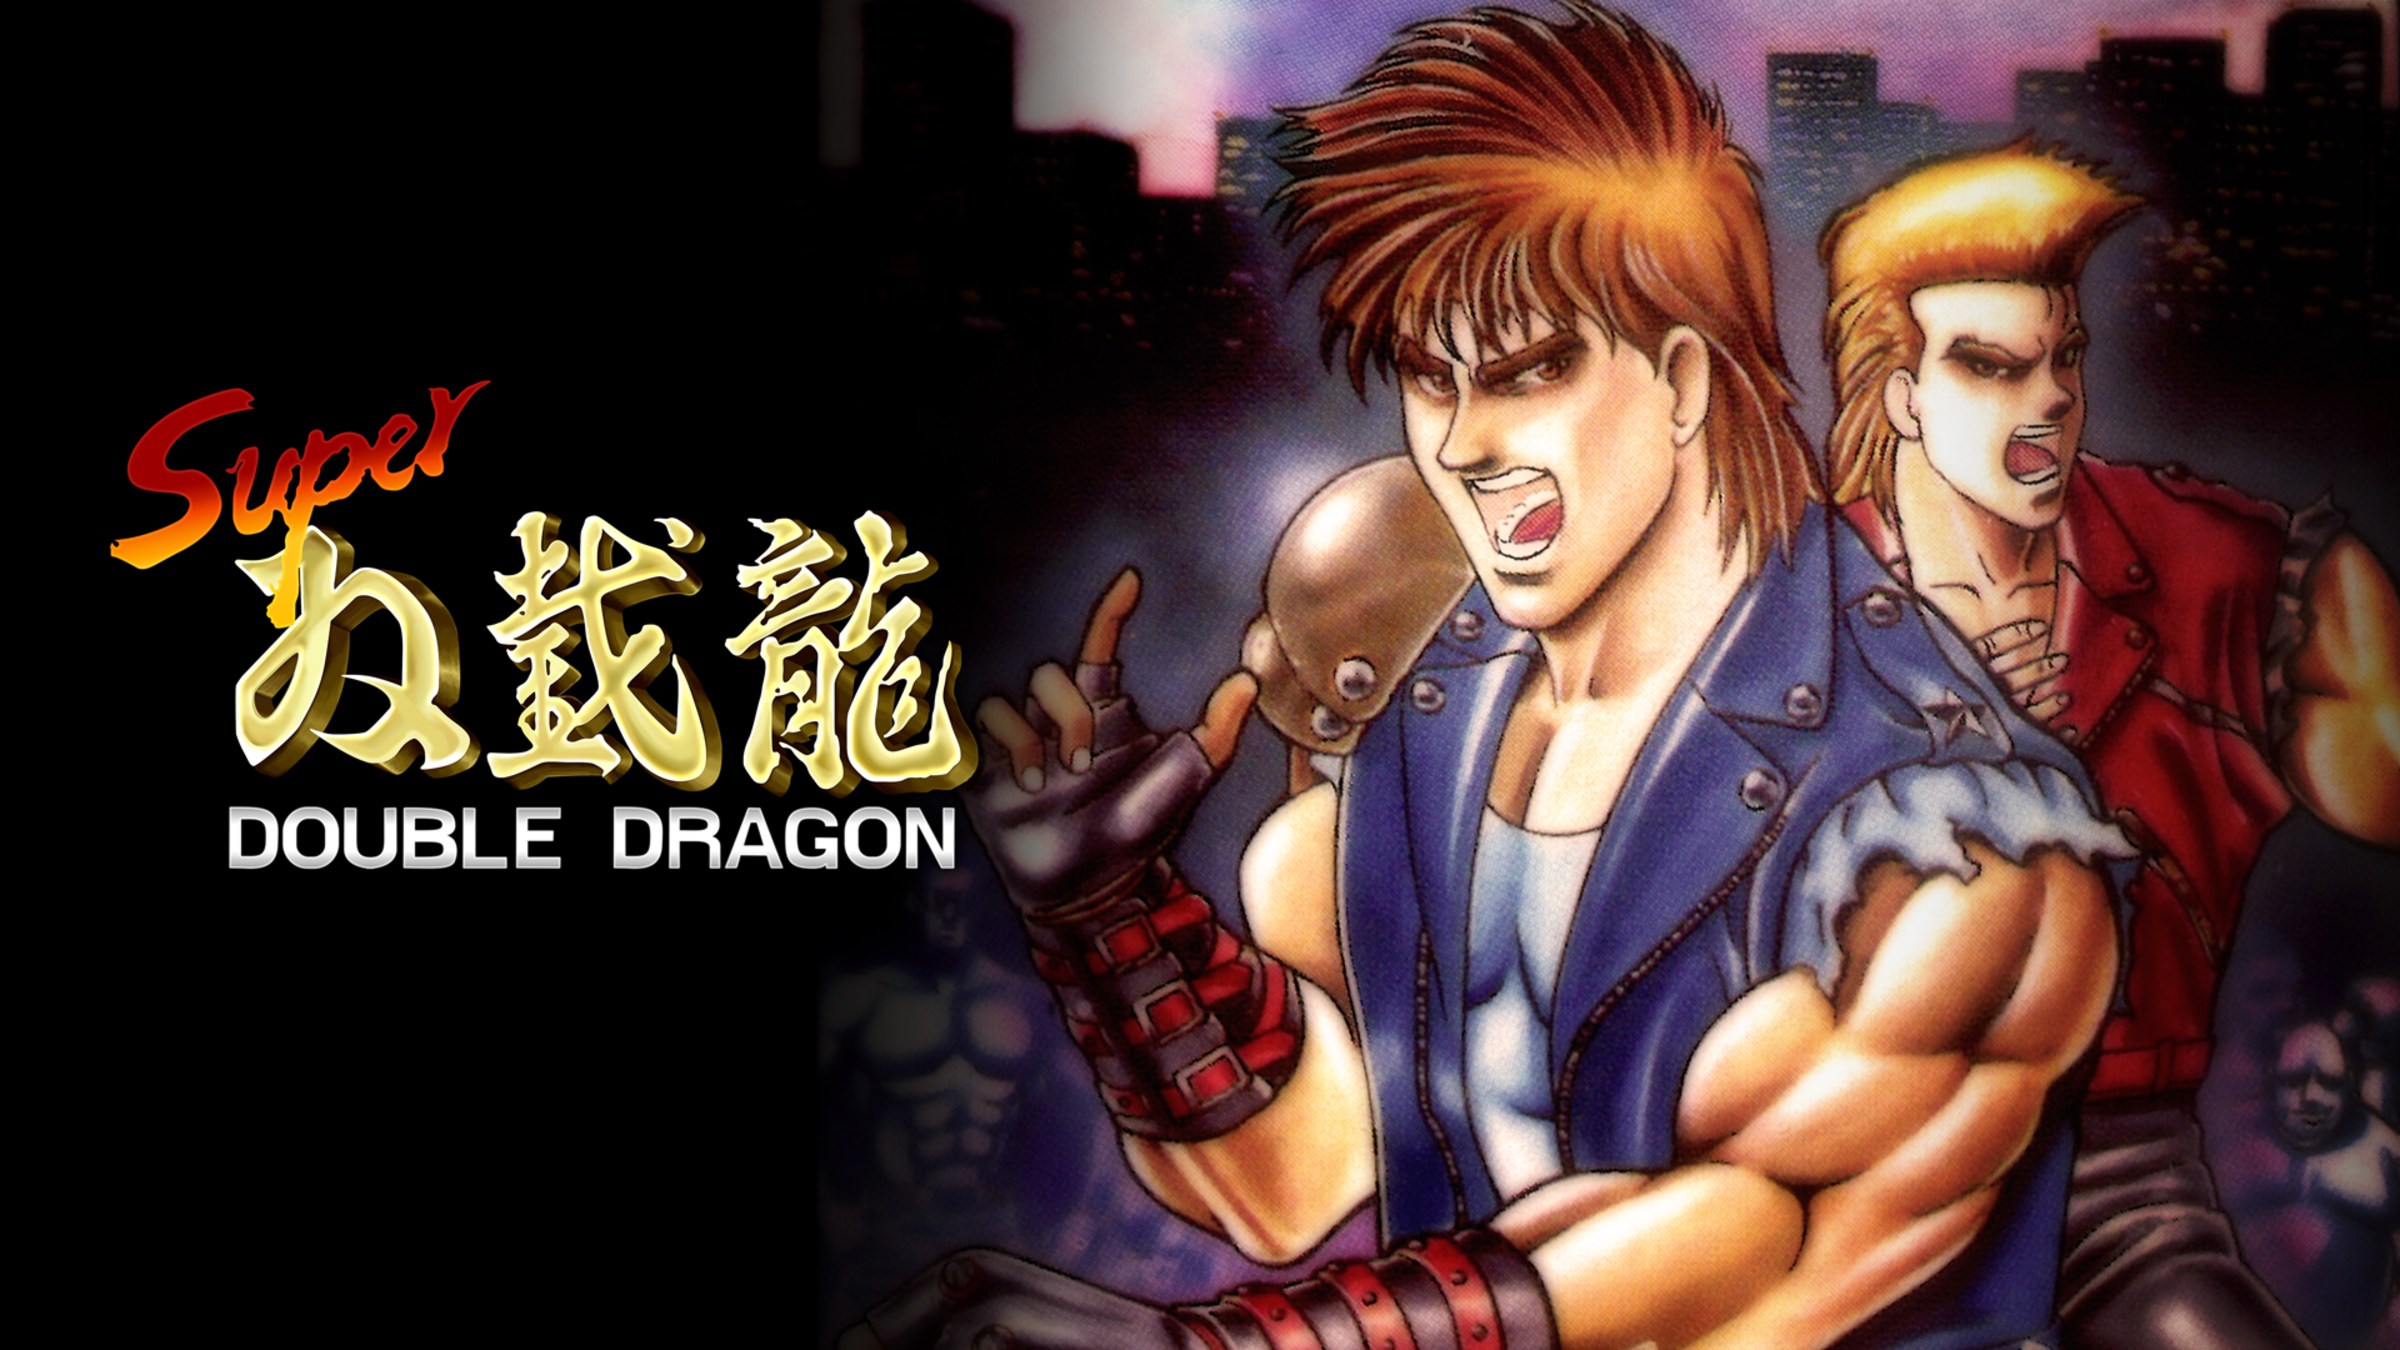 Double Dragon 4 for Nintendo Switch - Nintendo Official Site